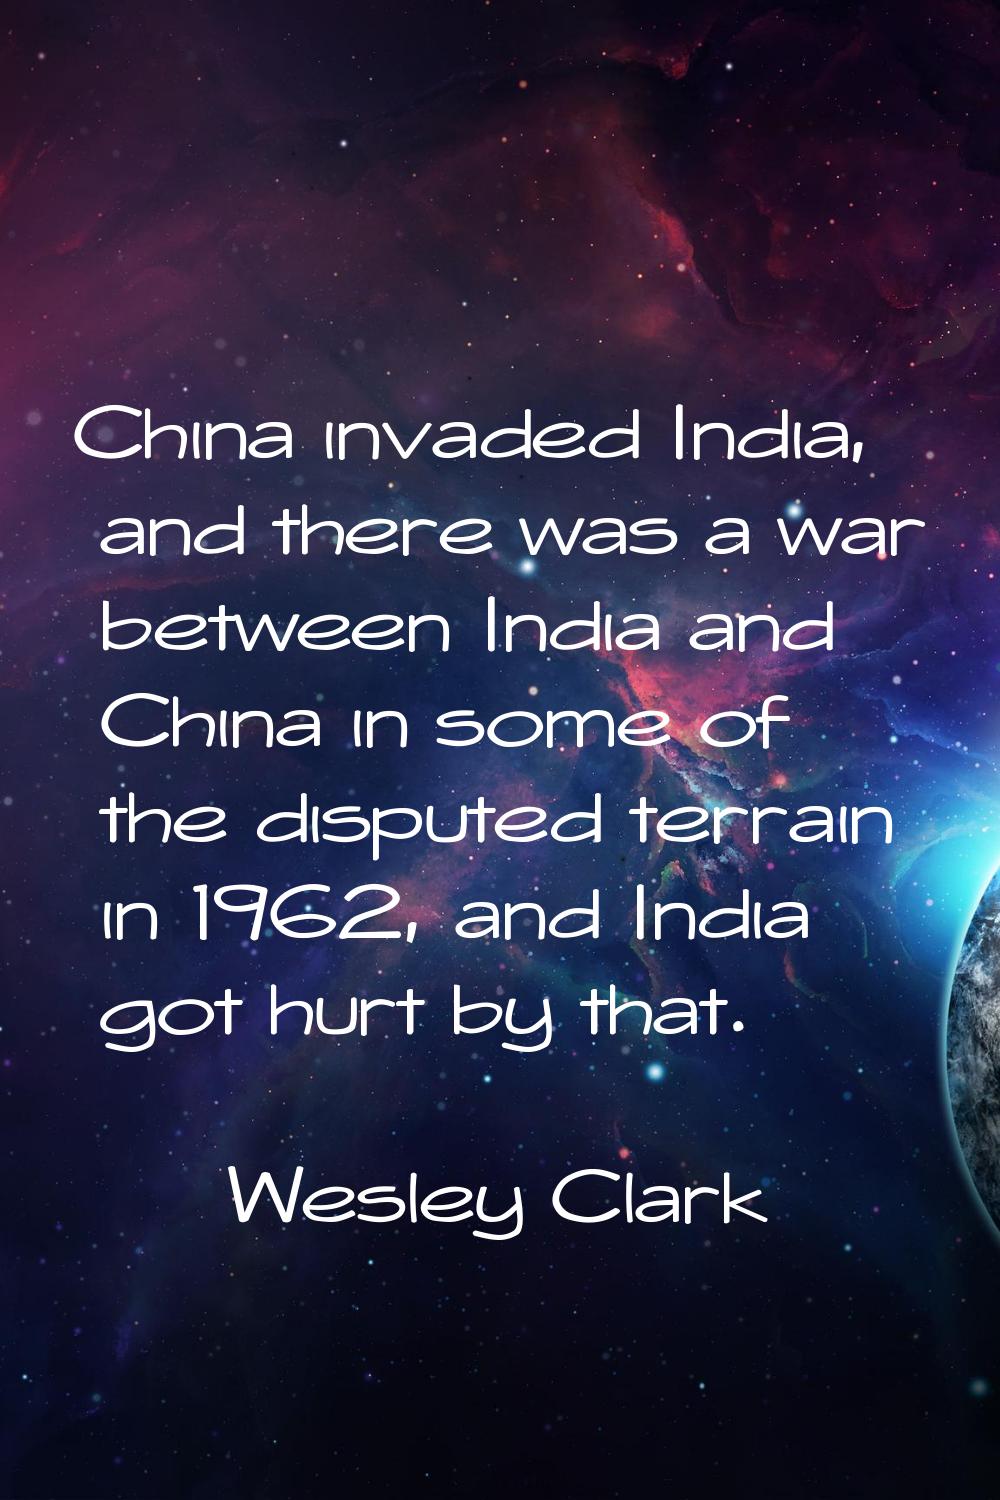 China invaded India, and there was a war between India and China in some of the disputed terrain in